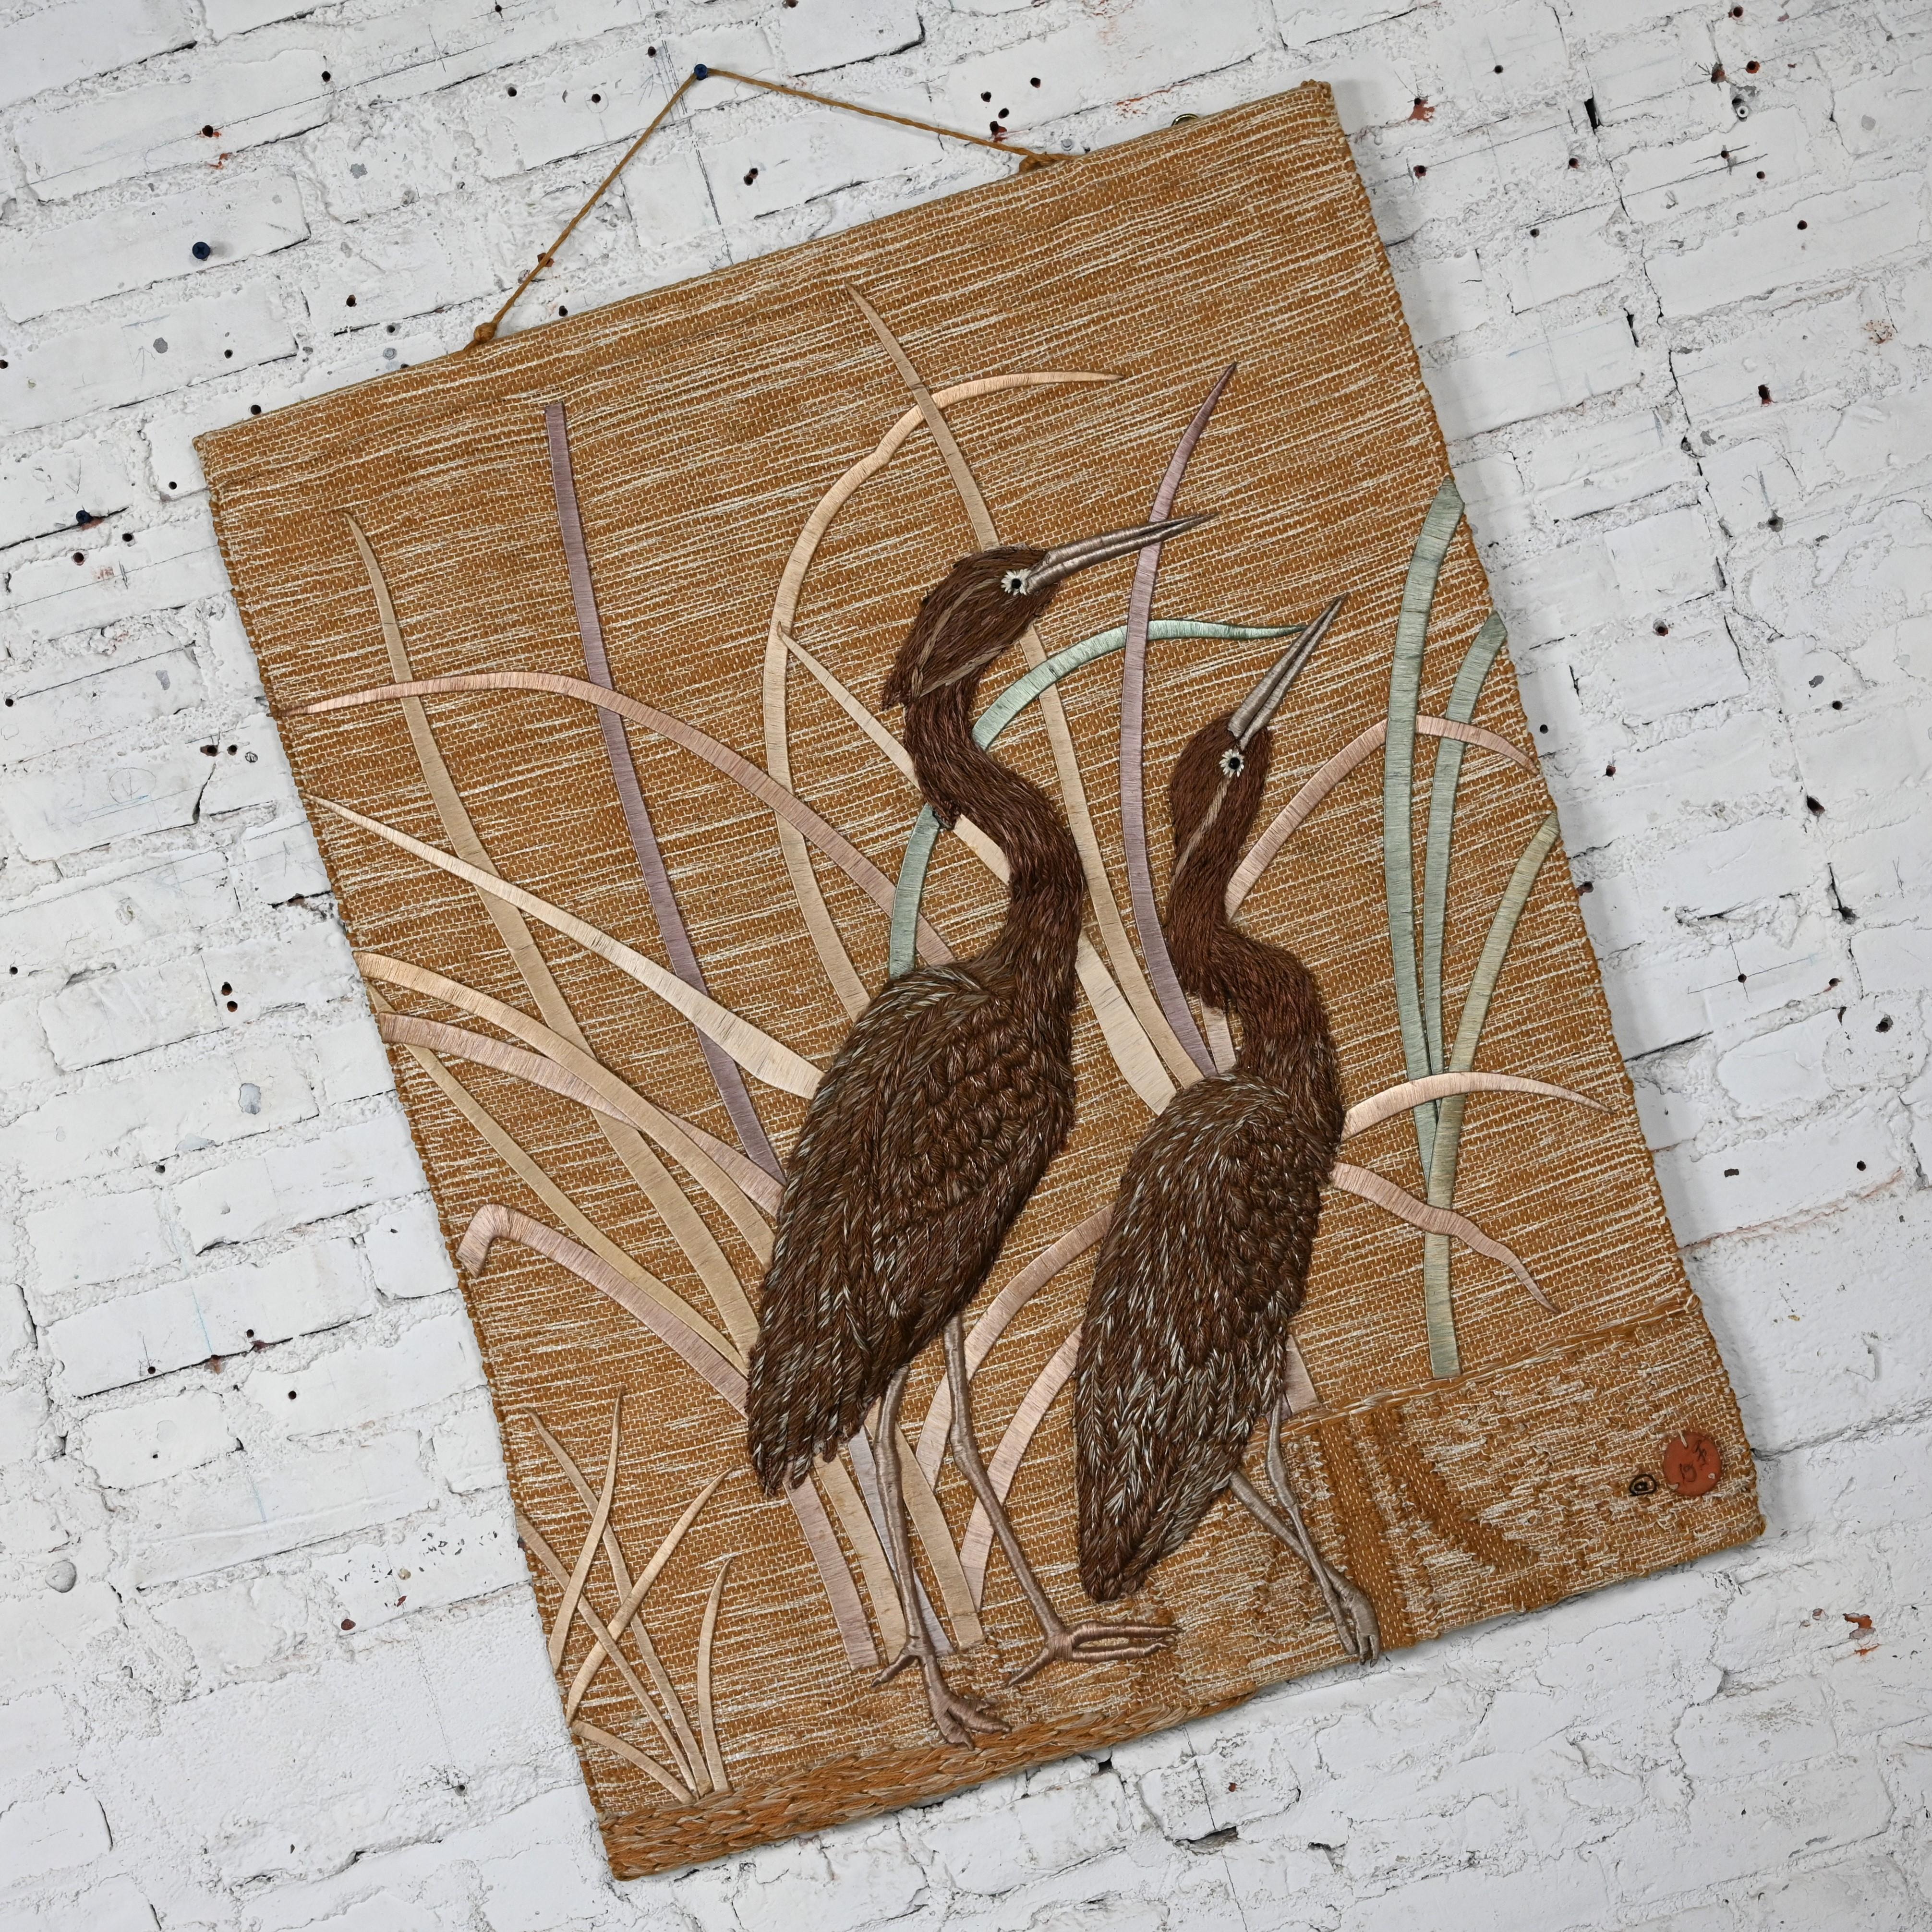 Wonderful Modern textile hand woven wall hanging #418 of cranes & grass by Don Freedman c/o Tree Time Inc. for Interlude. Comprised of a composition of jute, silk, wood, and cotton. Beautiful condition, keeping in mind that this is vintage and not